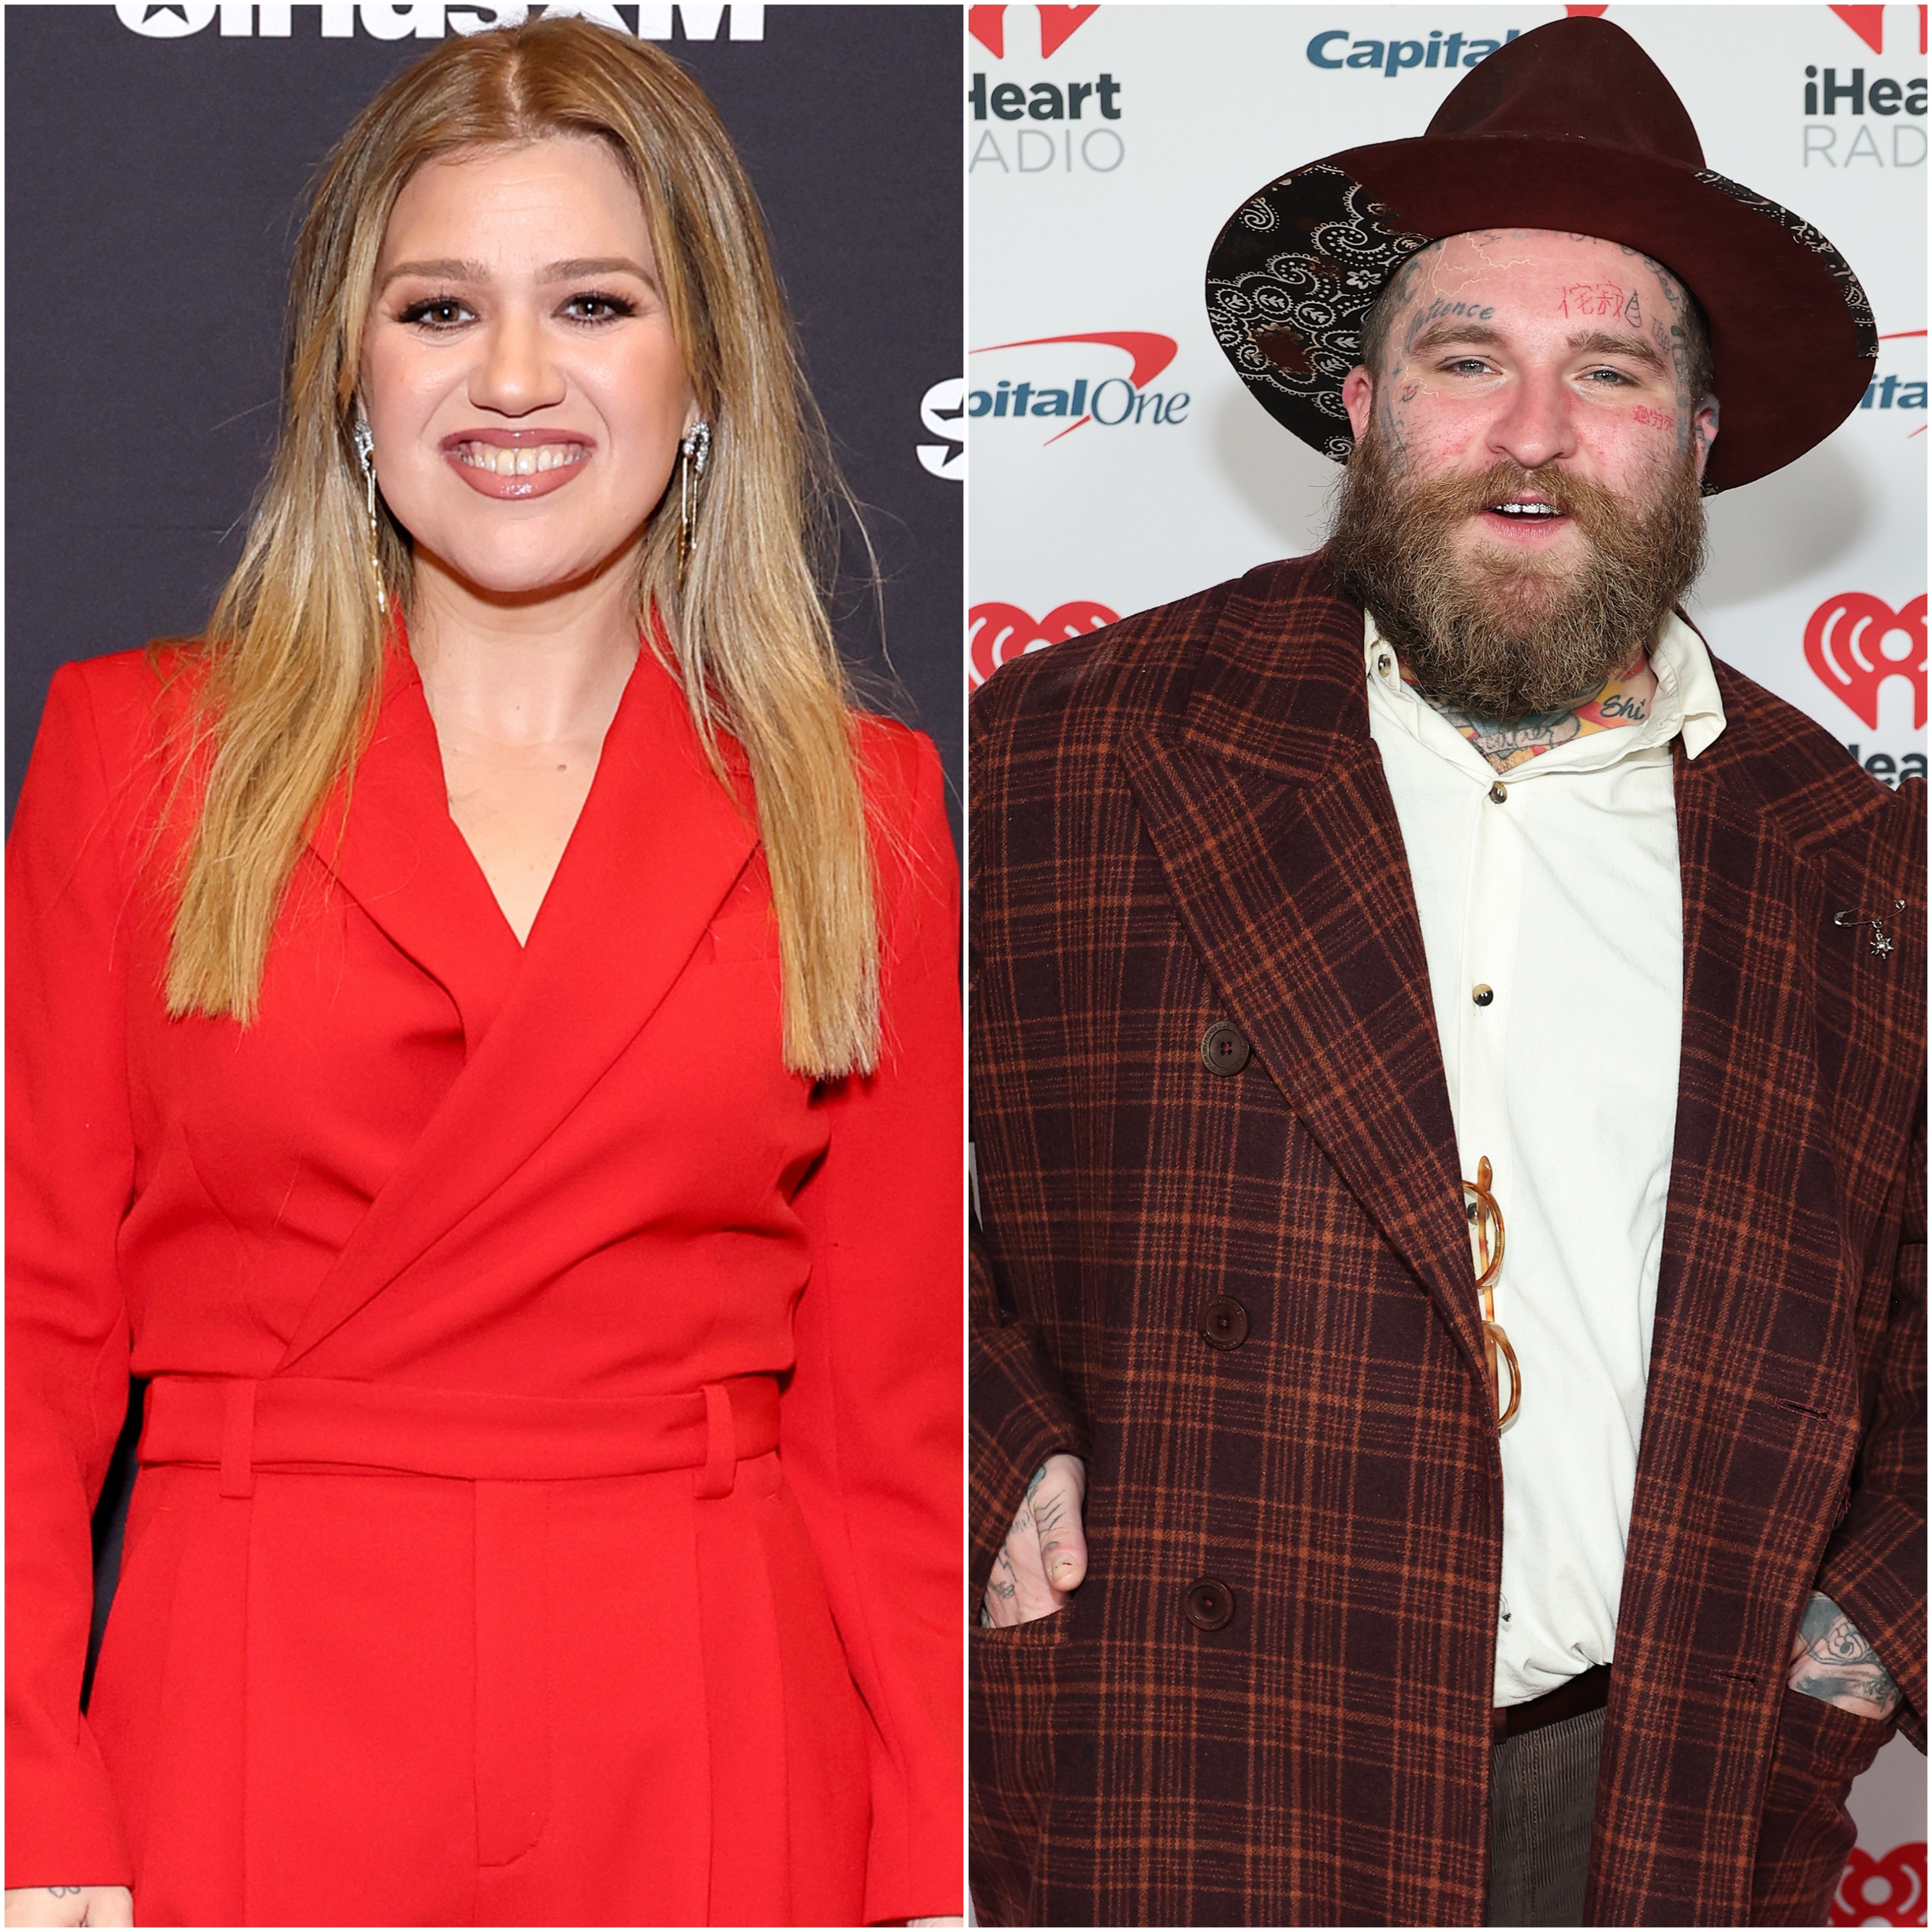 Fans Ship Kelly Clarkson With Teddy Swims After Sultry Duet